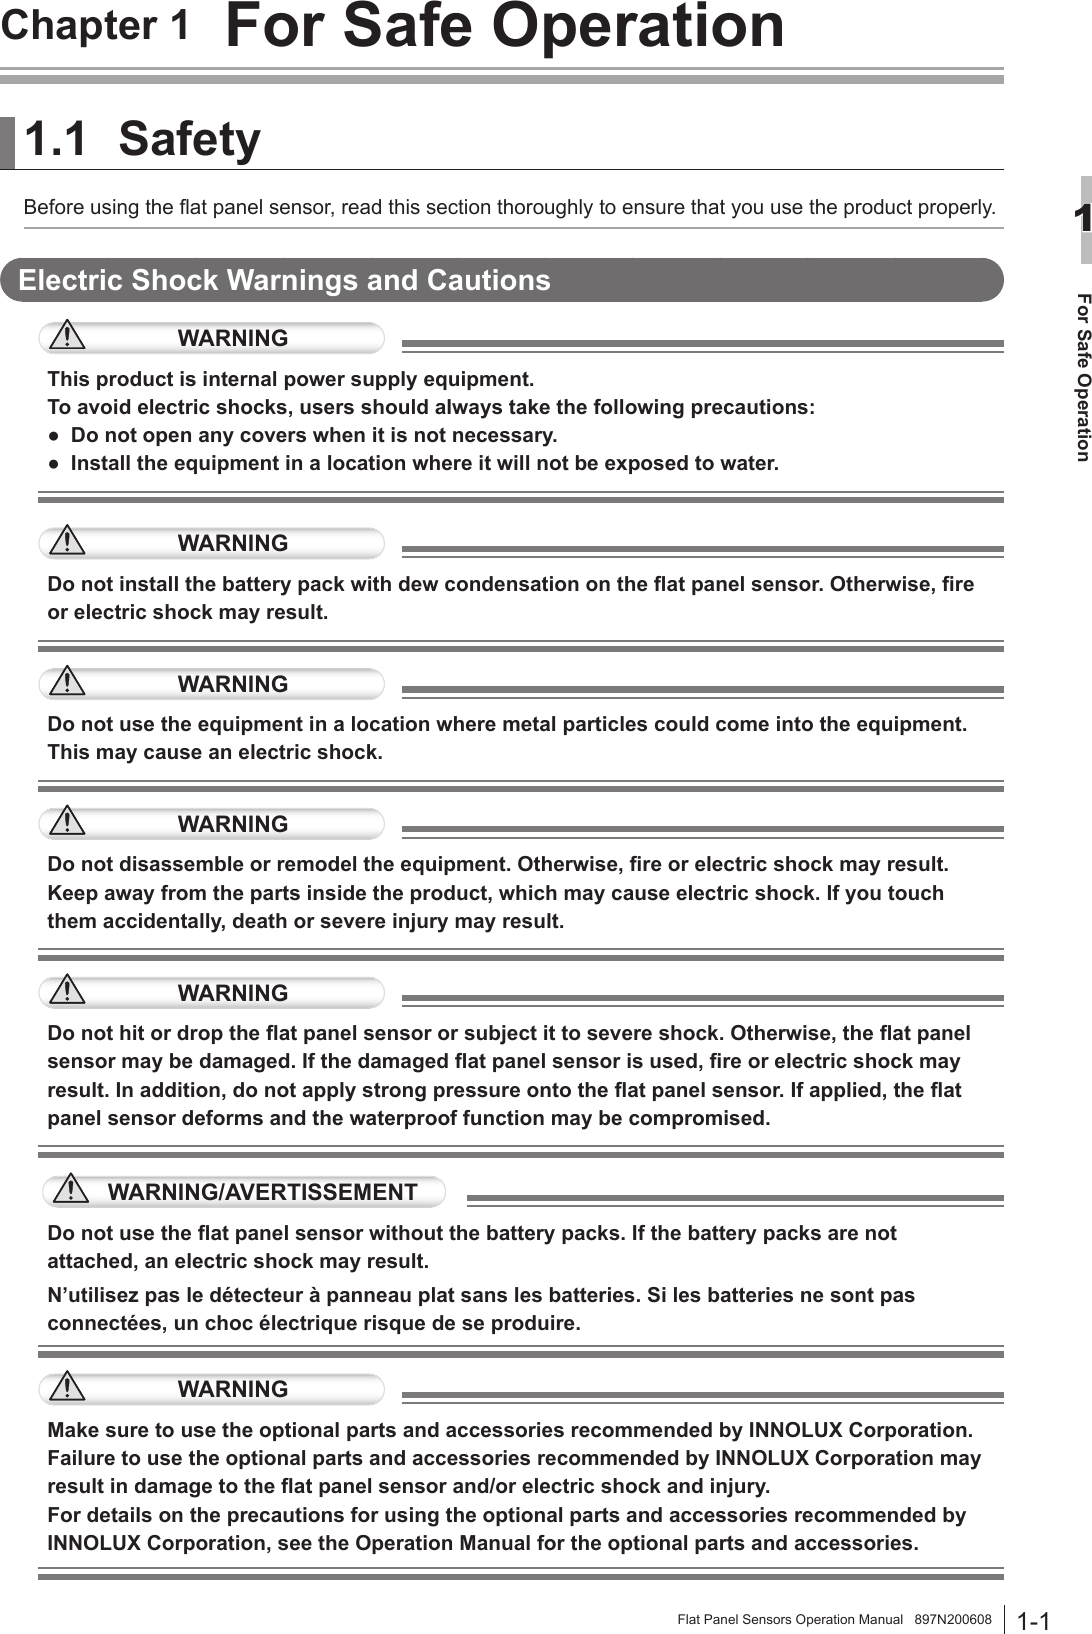 1-1For Safe Operation1Flat Panel Sensors Operation Manual   897N200608Chapter 1  For Safe Operation1.1 SafetyBefore using the at panel sensor, read this section thoroughly to ensure that you use the product properly.Electric Shock Warnings and CautionsWARNINGThis product is internal power supply equipment.To avoid electric shocks, users should always take the following precautions:●  Do not open any covers when it is not necessary.●  Install the equipment in a location where it will not be exposed to water.WARNINGDo not install the battery pack with dew condensation on the at panel sensor. Otherwise, re or electric shock may result.WARNINGDo not use the equipment in a location where metal particles could come into the equipment. This may cause an electric shock.WARNINGDo not disassemble or remodel the equipment. Otherwise, re or electric shock may result. Keep away from the parts inside the product, which may cause electric shock. If you touch them accidentally, death or severe injury may result. WARNINGDo not hit or drop the at panel sensor or subject it to severe shock. Otherwise, the at panel sensor may be damaged. If the damaged at panel sensor is used, re or electric shock may result. In addition, do not apply strong pressure onto the at panel sensor. If applied, the at panel sensor deforms and the waterproof function may be compromised.WARNING/AVERTISSEMENTDo not use the at panel sensor without the battery packs. If the battery packs are not attached, an electric shock may result.N’utilisez pas le détecteur à panneau plat sans les batteries. Si les batteries ne sont pas connectées, un choc électrique risque de se produire.WARNINGMake sure to use the optional parts and accessories recommended by INNOLUX Corporation. Failure to use the optional parts and accessories recommended by INNOLUX Corporation may result in damage to the at panel sensor and/or electric shock and injury.For details on the precautions for using the optional parts and accessories recommended by INNOLUX Corporation, see the Operation Manual for the optional parts and accessories. 